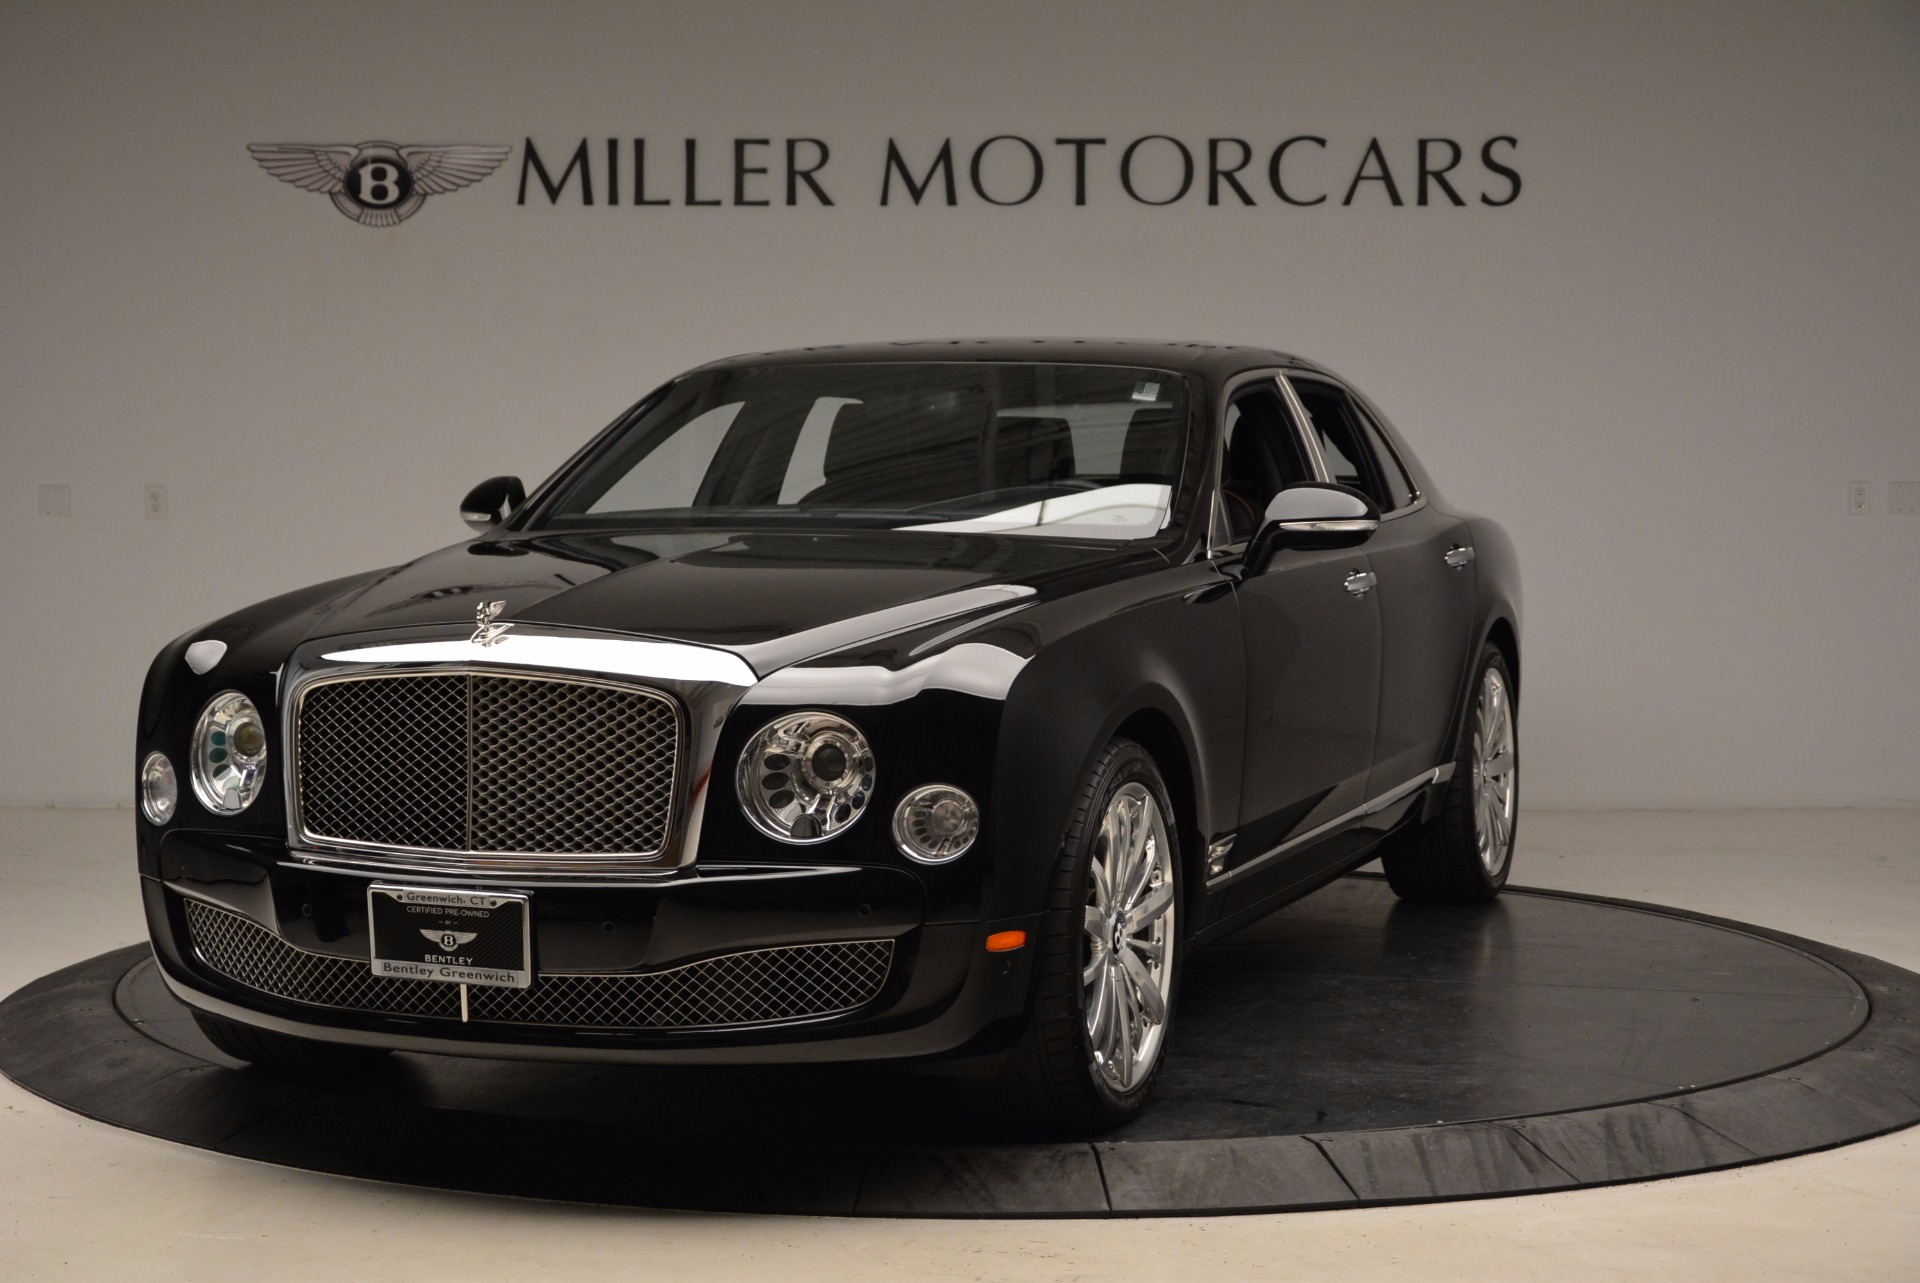 Used 2016 Bentley Mulsanne for sale Sold at Bugatti of Greenwich in Greenwich CT 06830 1